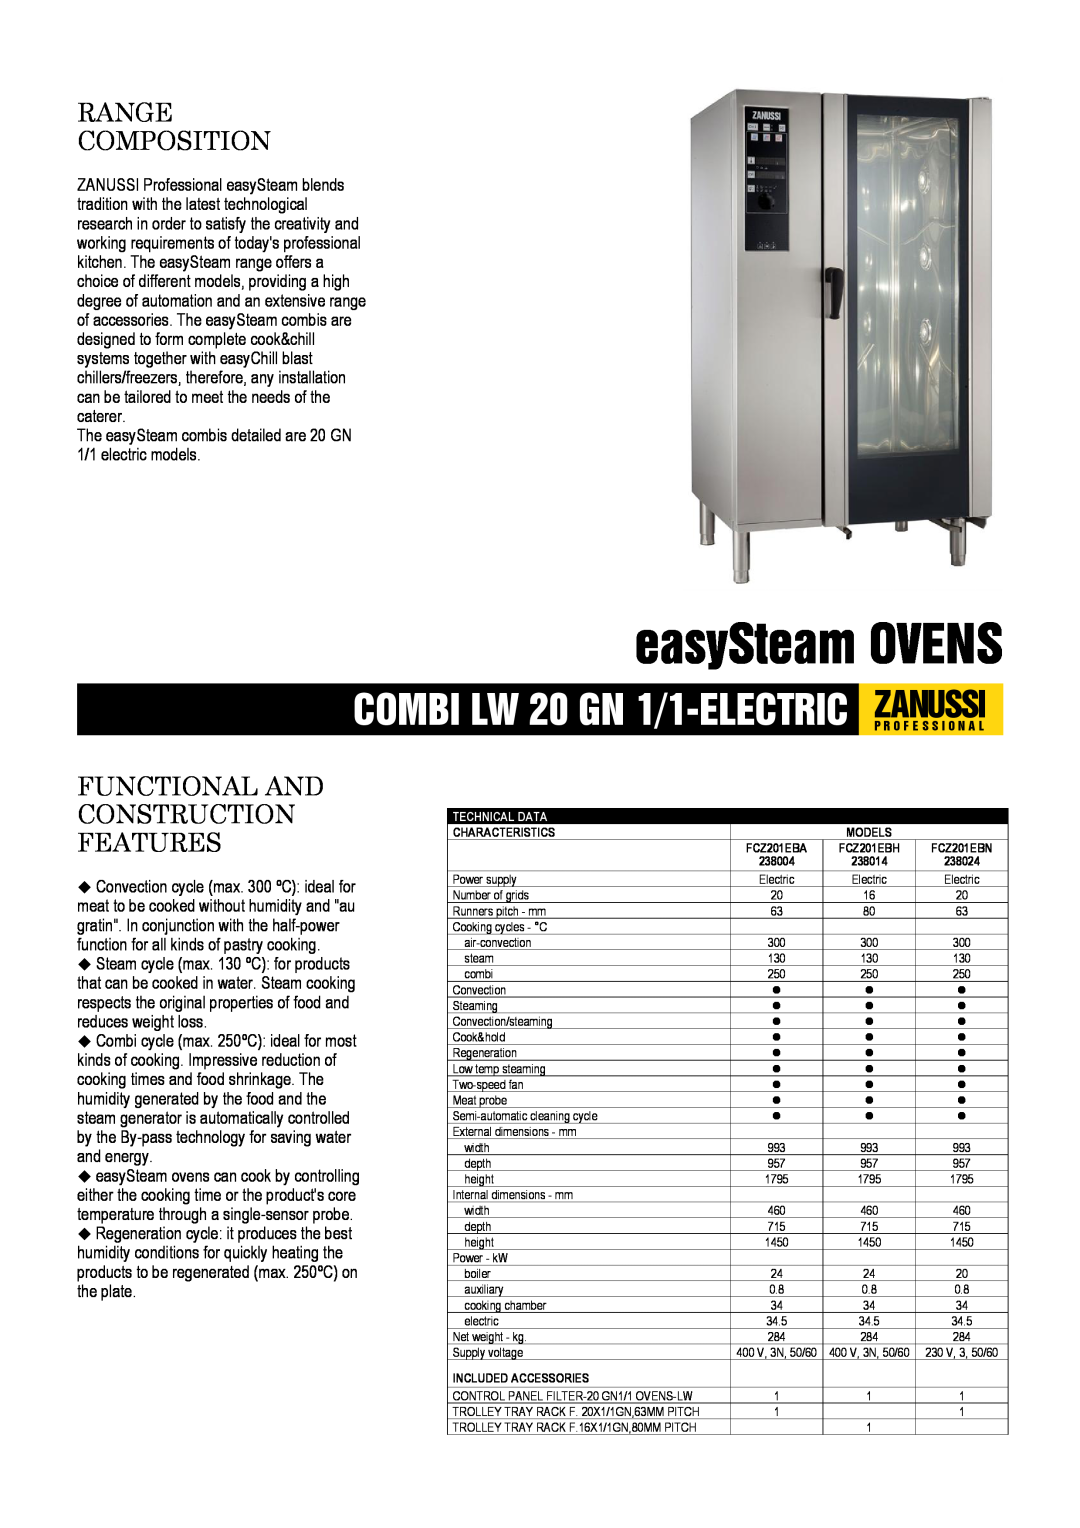 Zanussi FCZ201EBA, FCZ201EBH, 238024 dimensions easySteam OVENS, Range Composition, Functional And Construction Features 